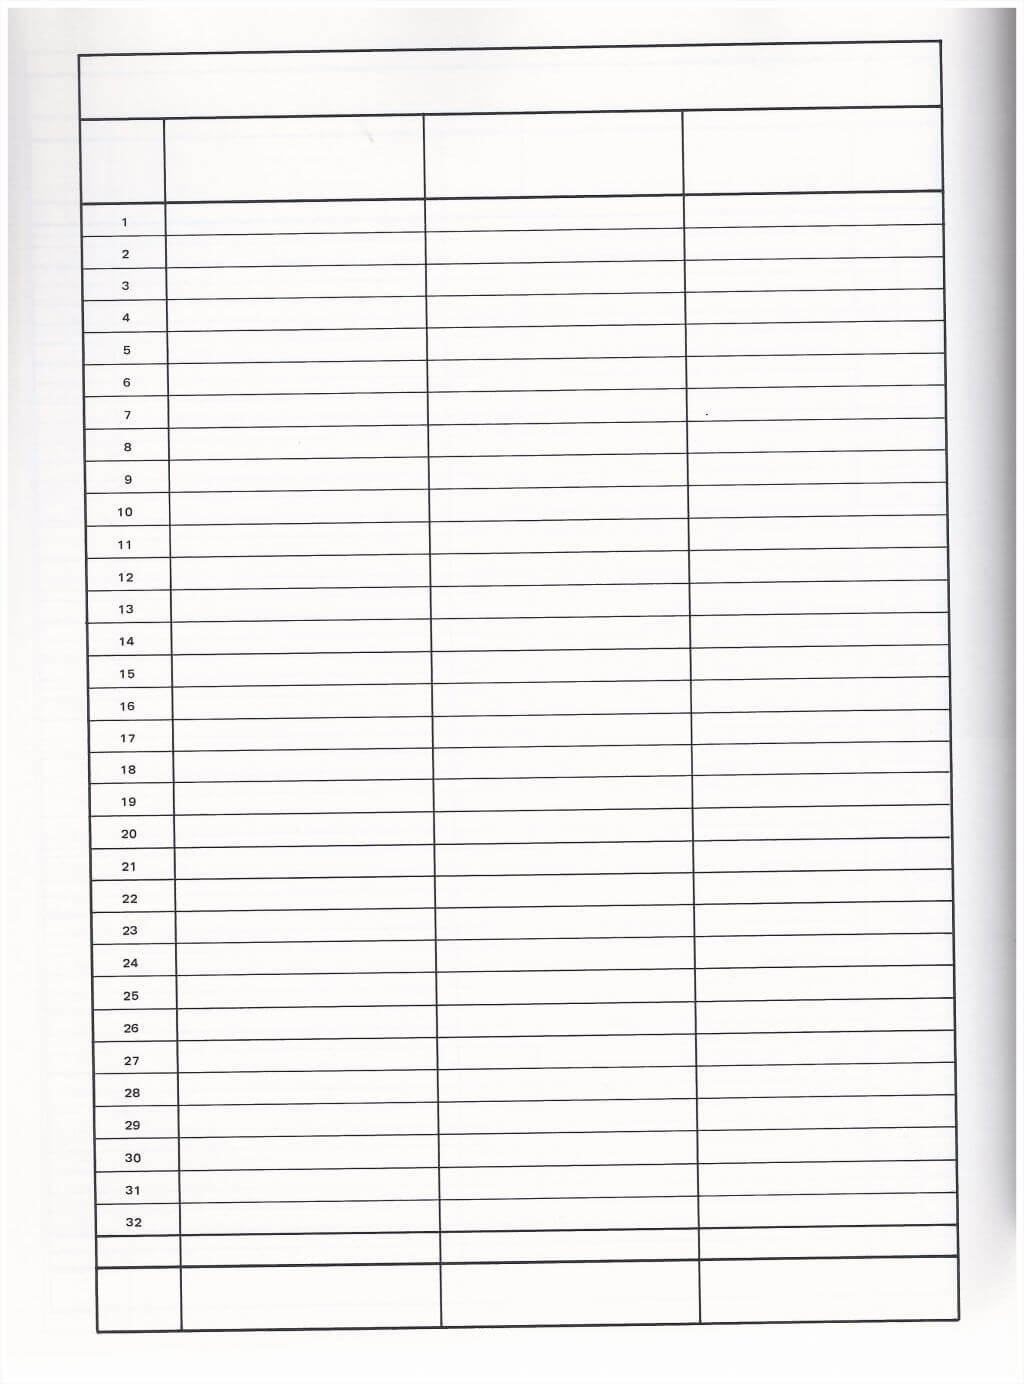 10-best-images-of-printable-blank-charts-with-columns-4-3-in-3-column